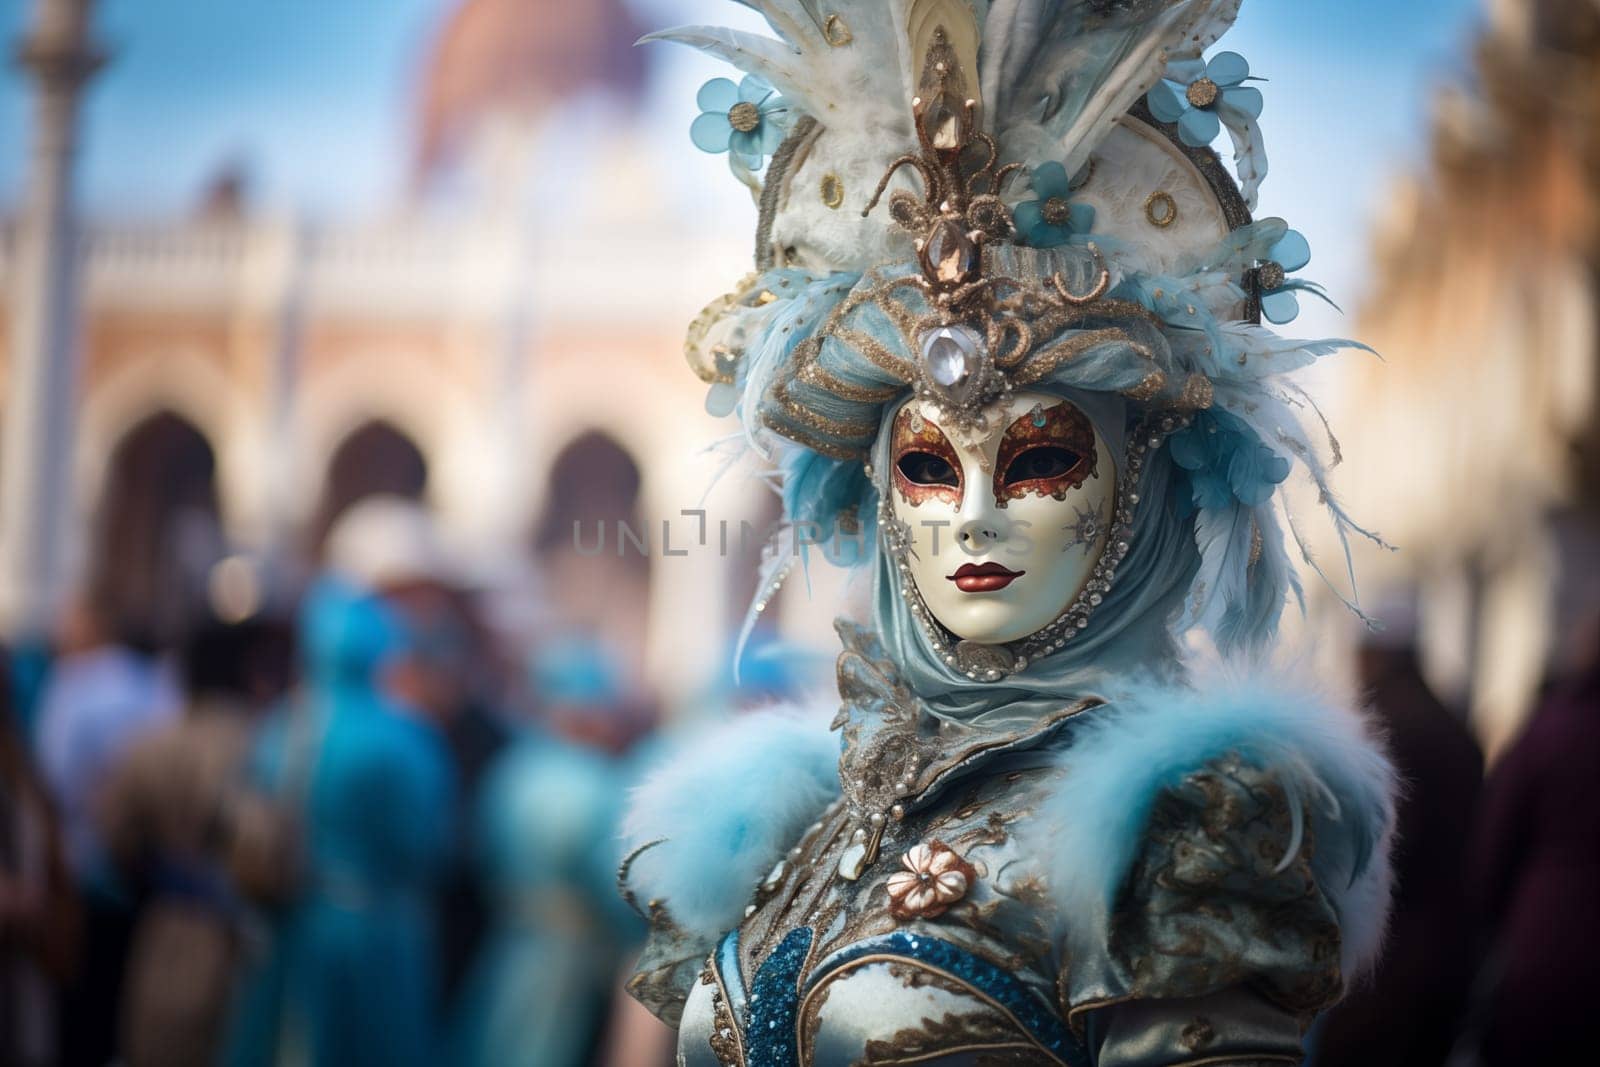 A person adorned in an elaborate and elegant costume, capturing the essence of the Venice Carnival amidst a scenic backdrop